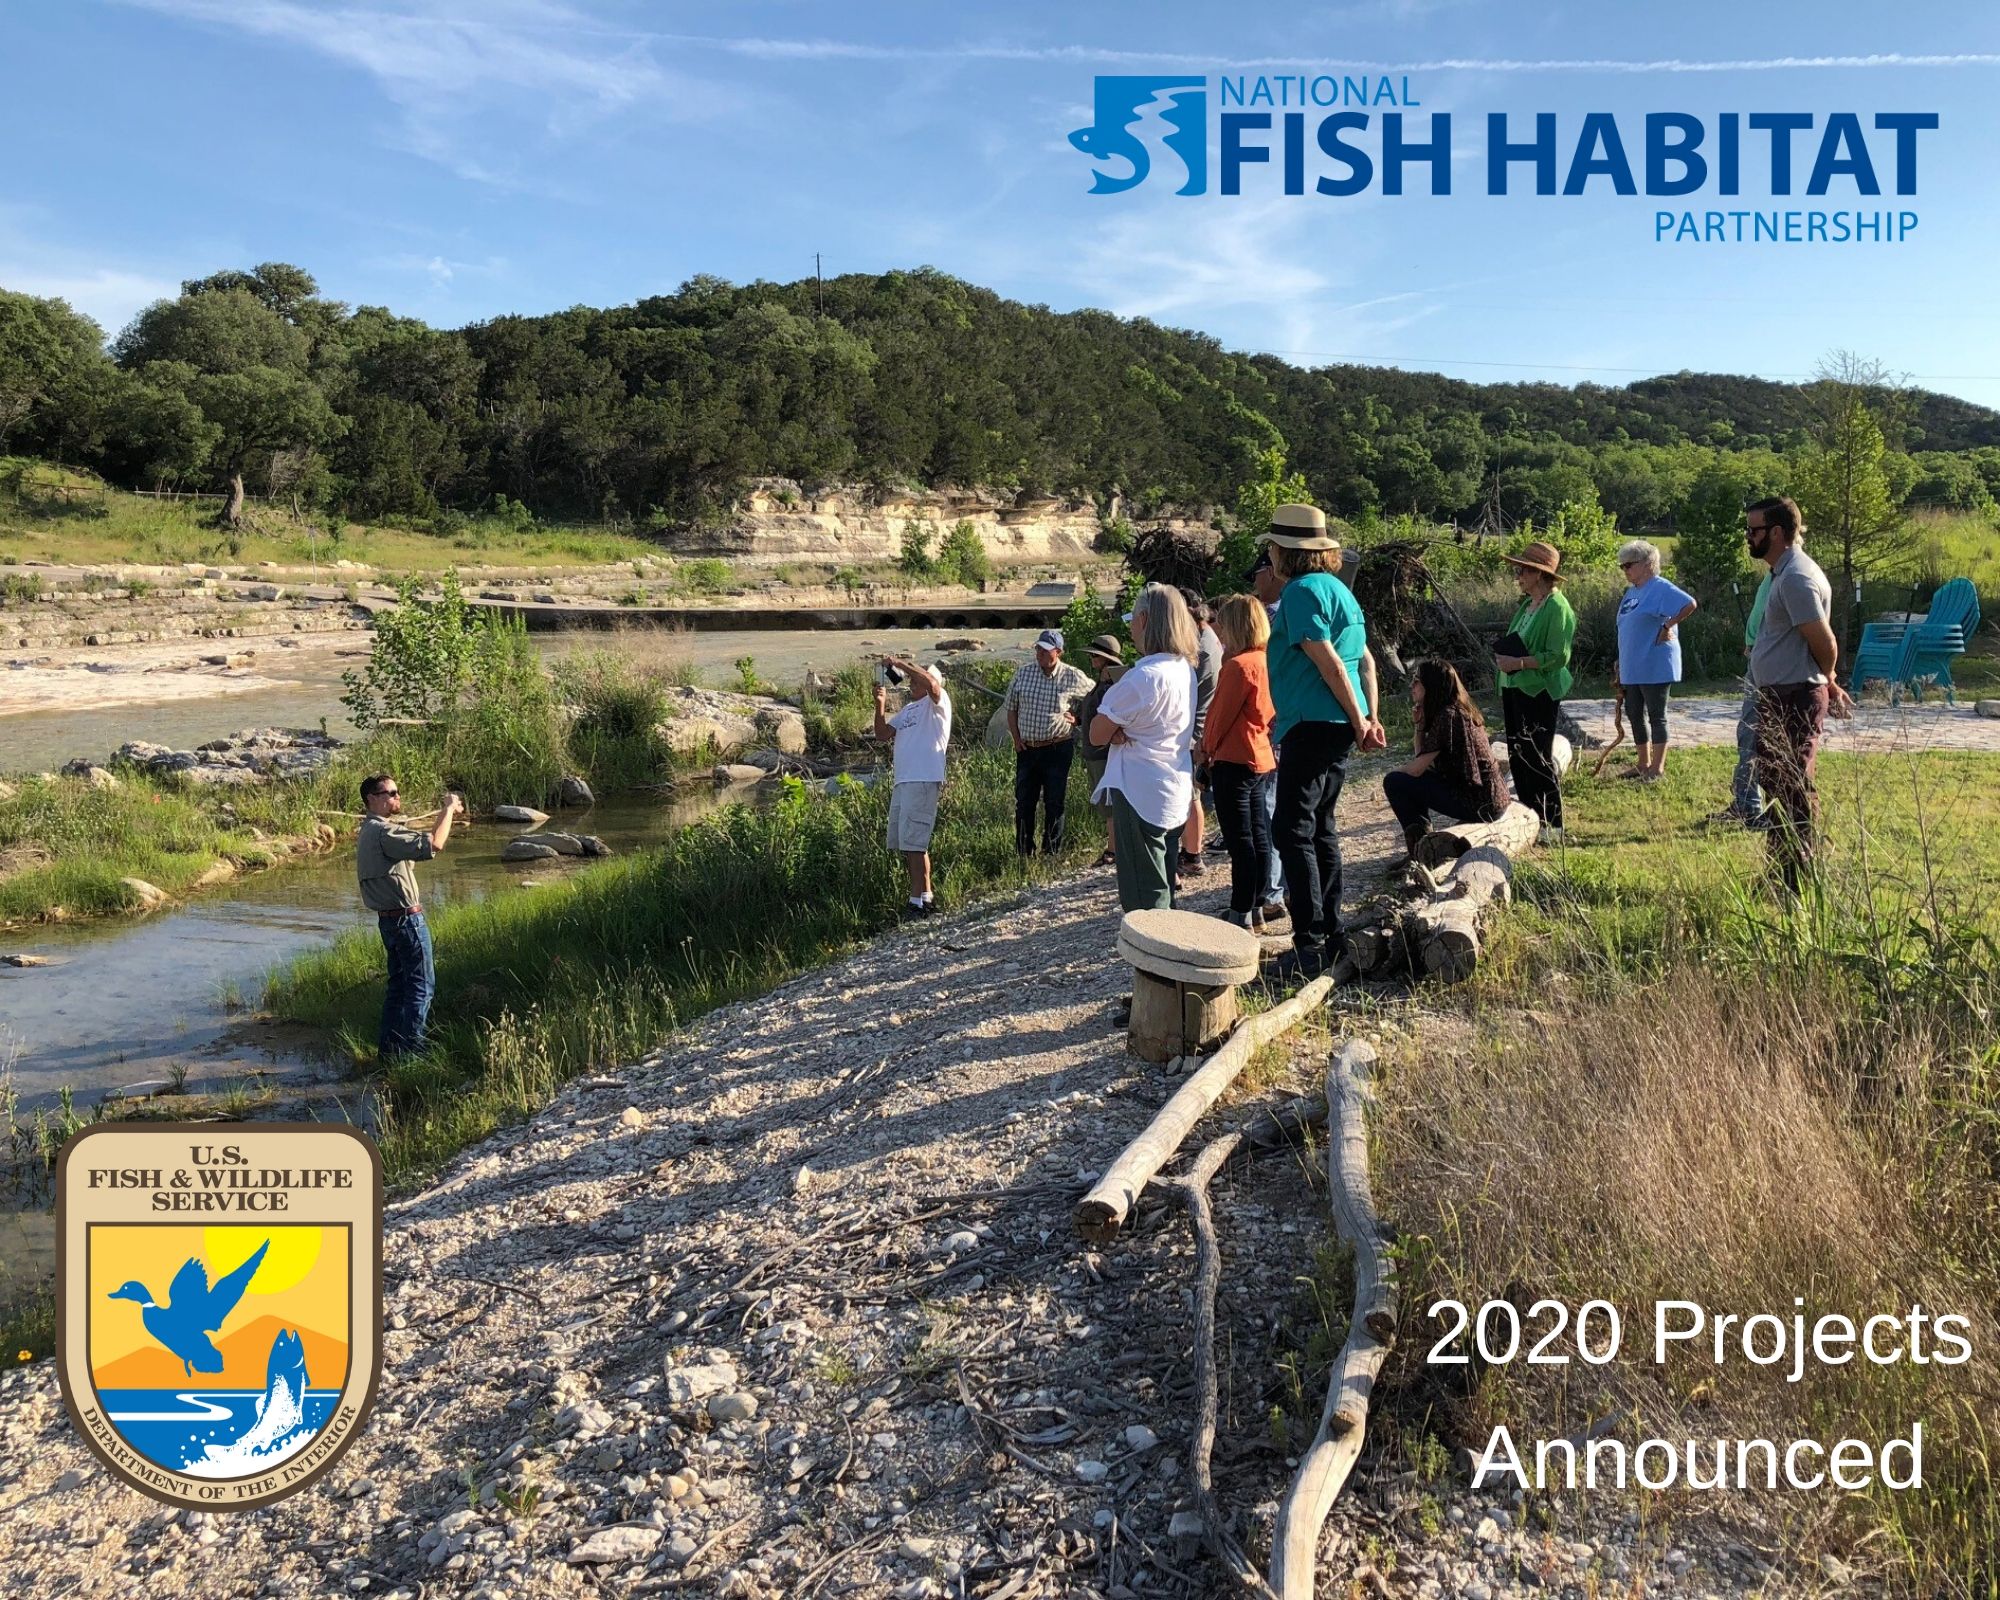 USFWS, Partners to Provide More Than $35 Million for Fish Habitat Conservation in 2020